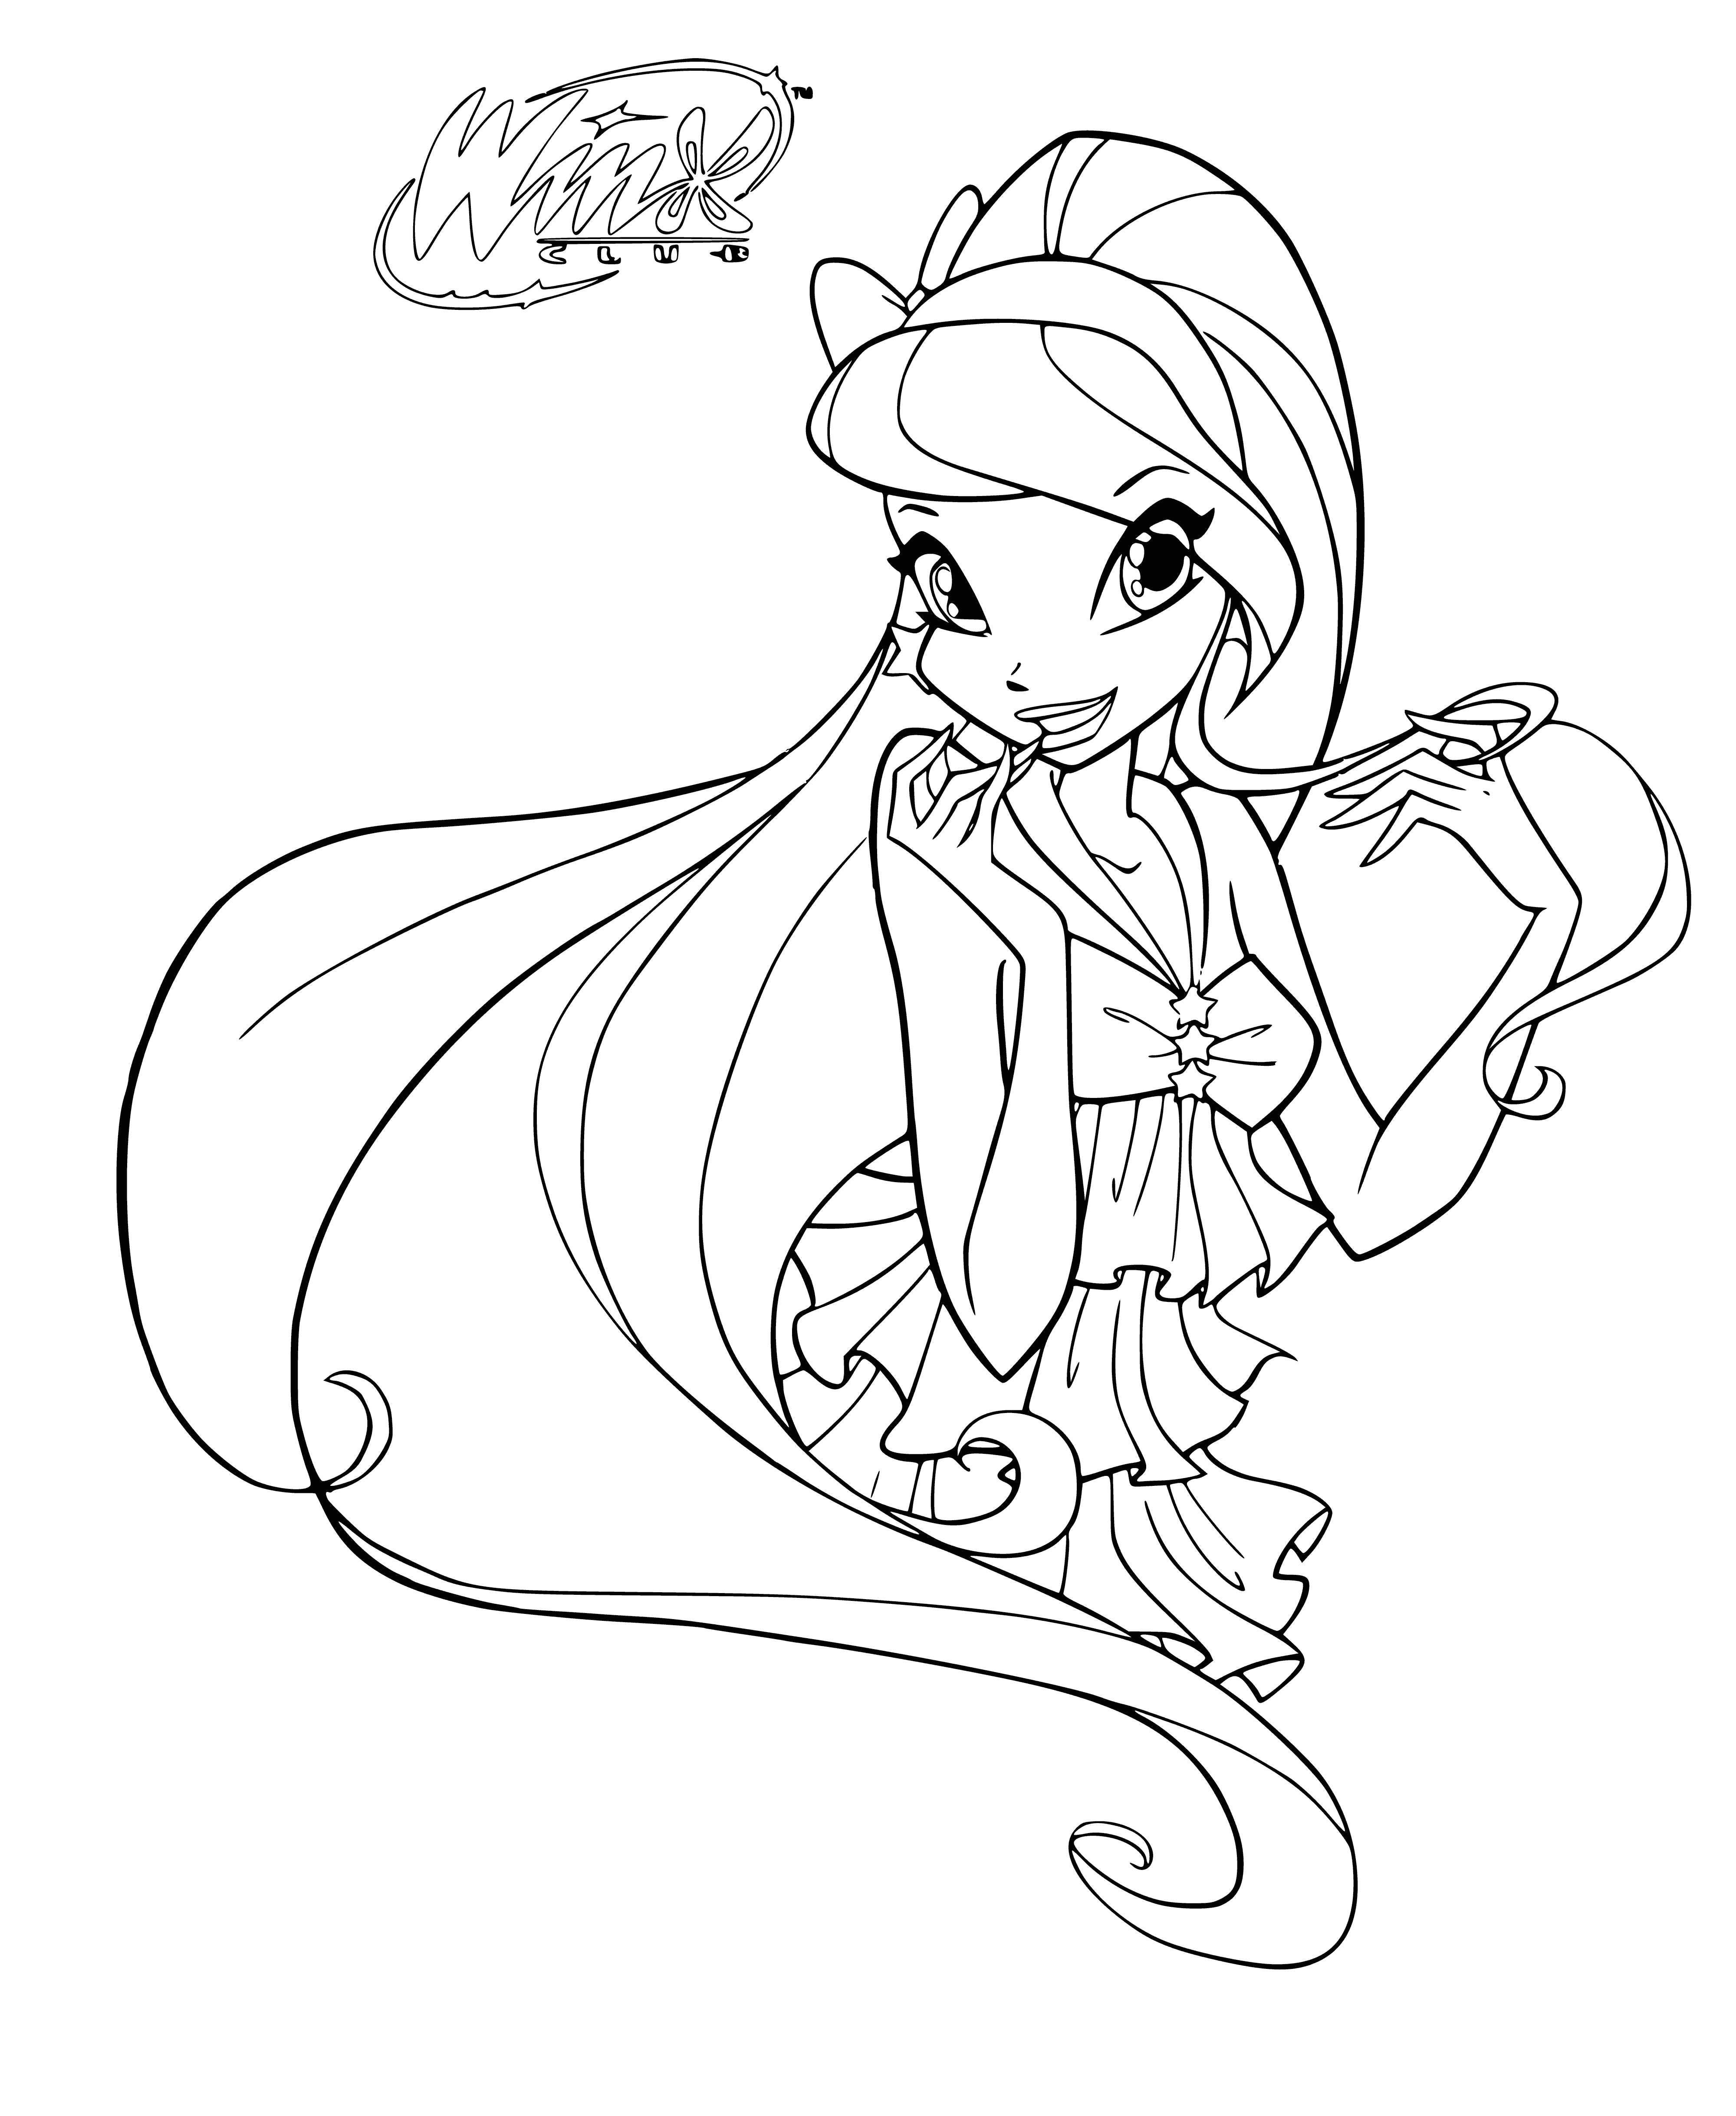 coloring page: Stella is the leader of the Winx Club, a group of fairies from Solaria; she has the power to control the sun & stars & is kind-hearted yet headstrong.